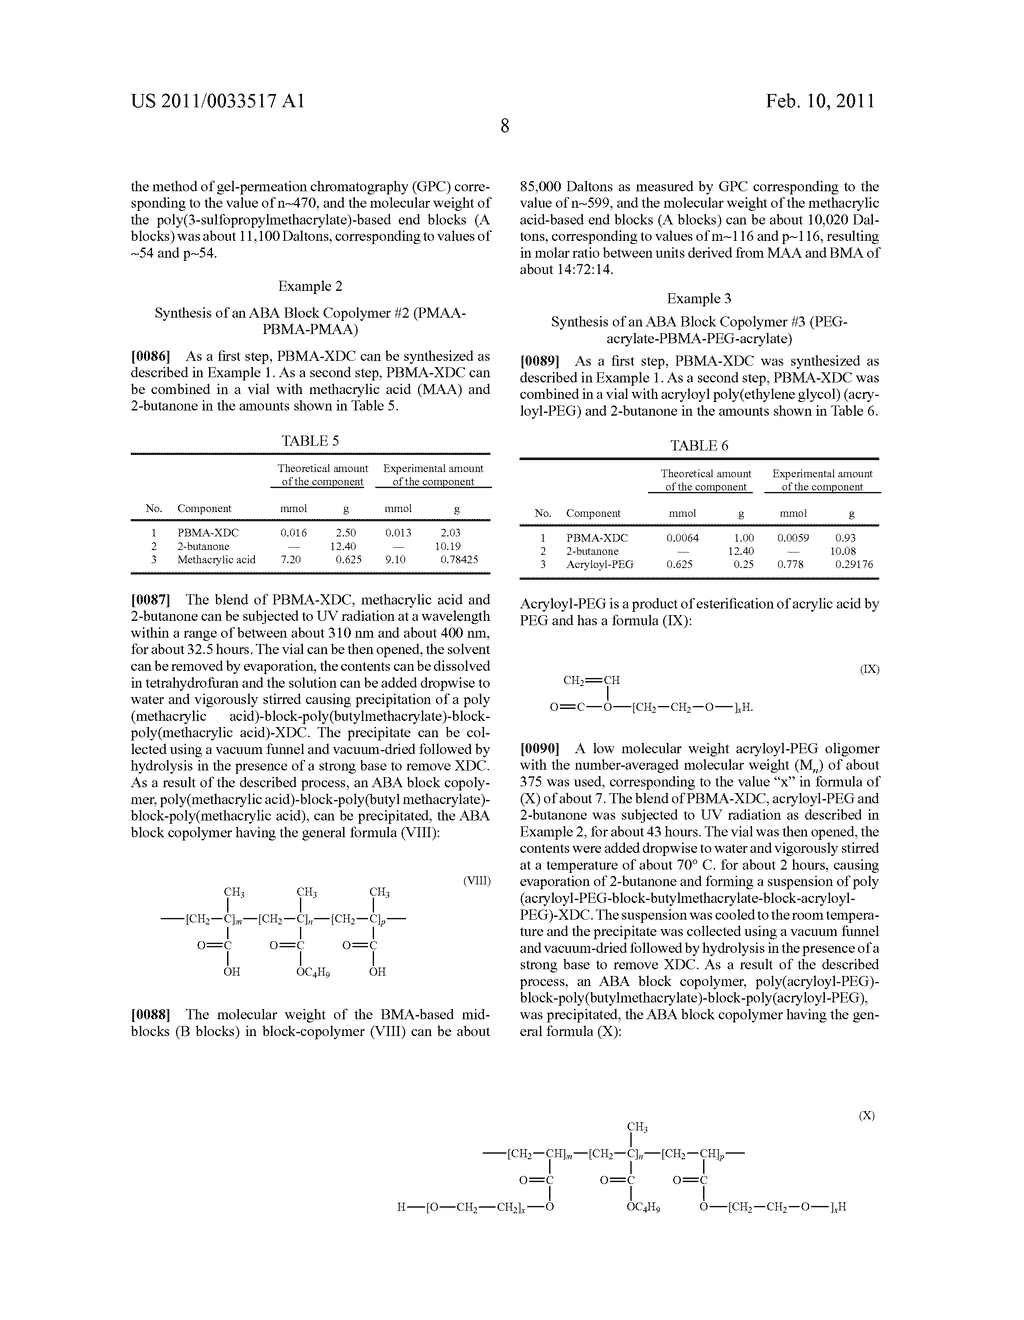 COATINGS FOR IMPLANTABLE MEDICAL DEVICES COMPRISING HYDROPHILIC SUBSTANCES AND METHODS FOR FABRICATING THE SAME - diagram, schematic, and image 15